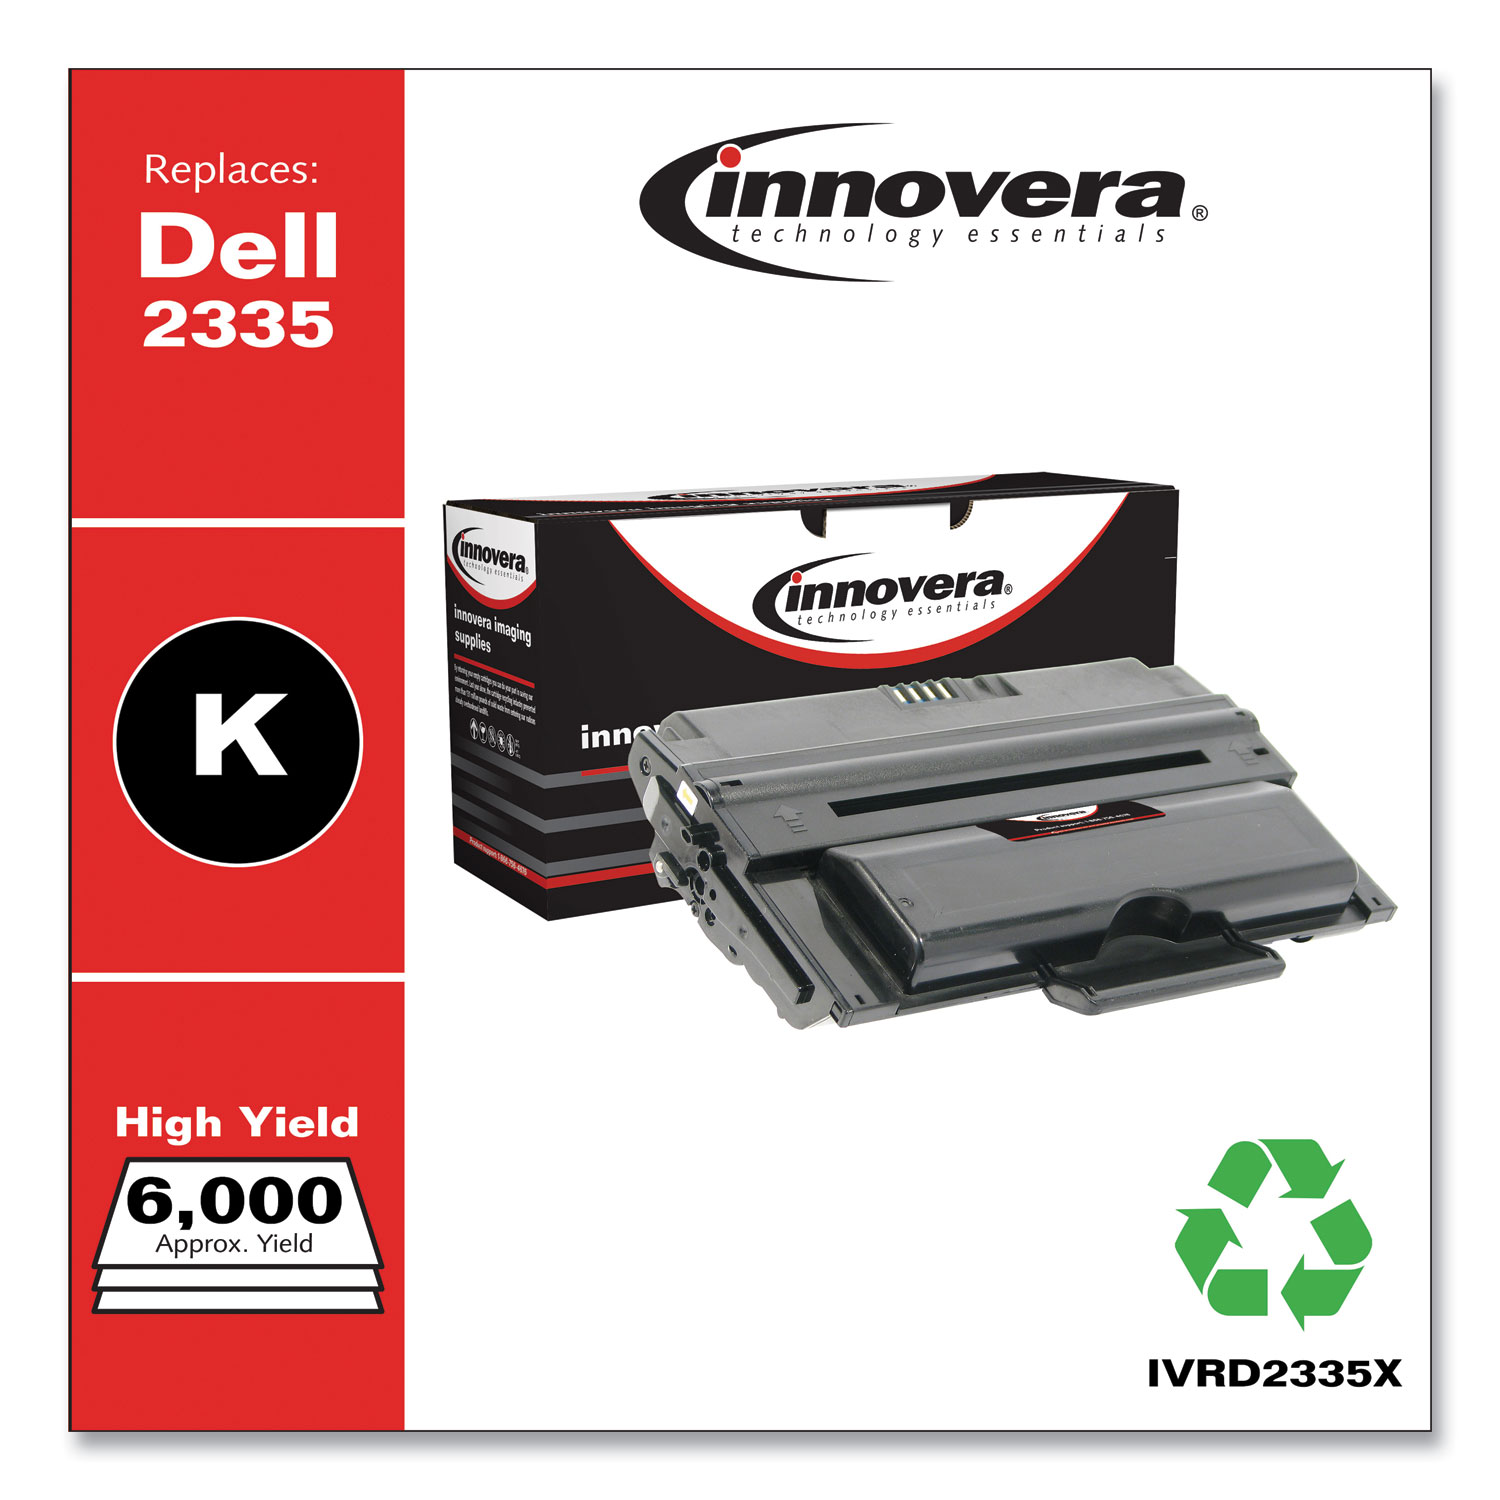  Innovera IVRD2335X Remanufactured 330-2209 (2335) High-Yield Toner, 6000 Page-Yield, Black (IVRD2335X) 